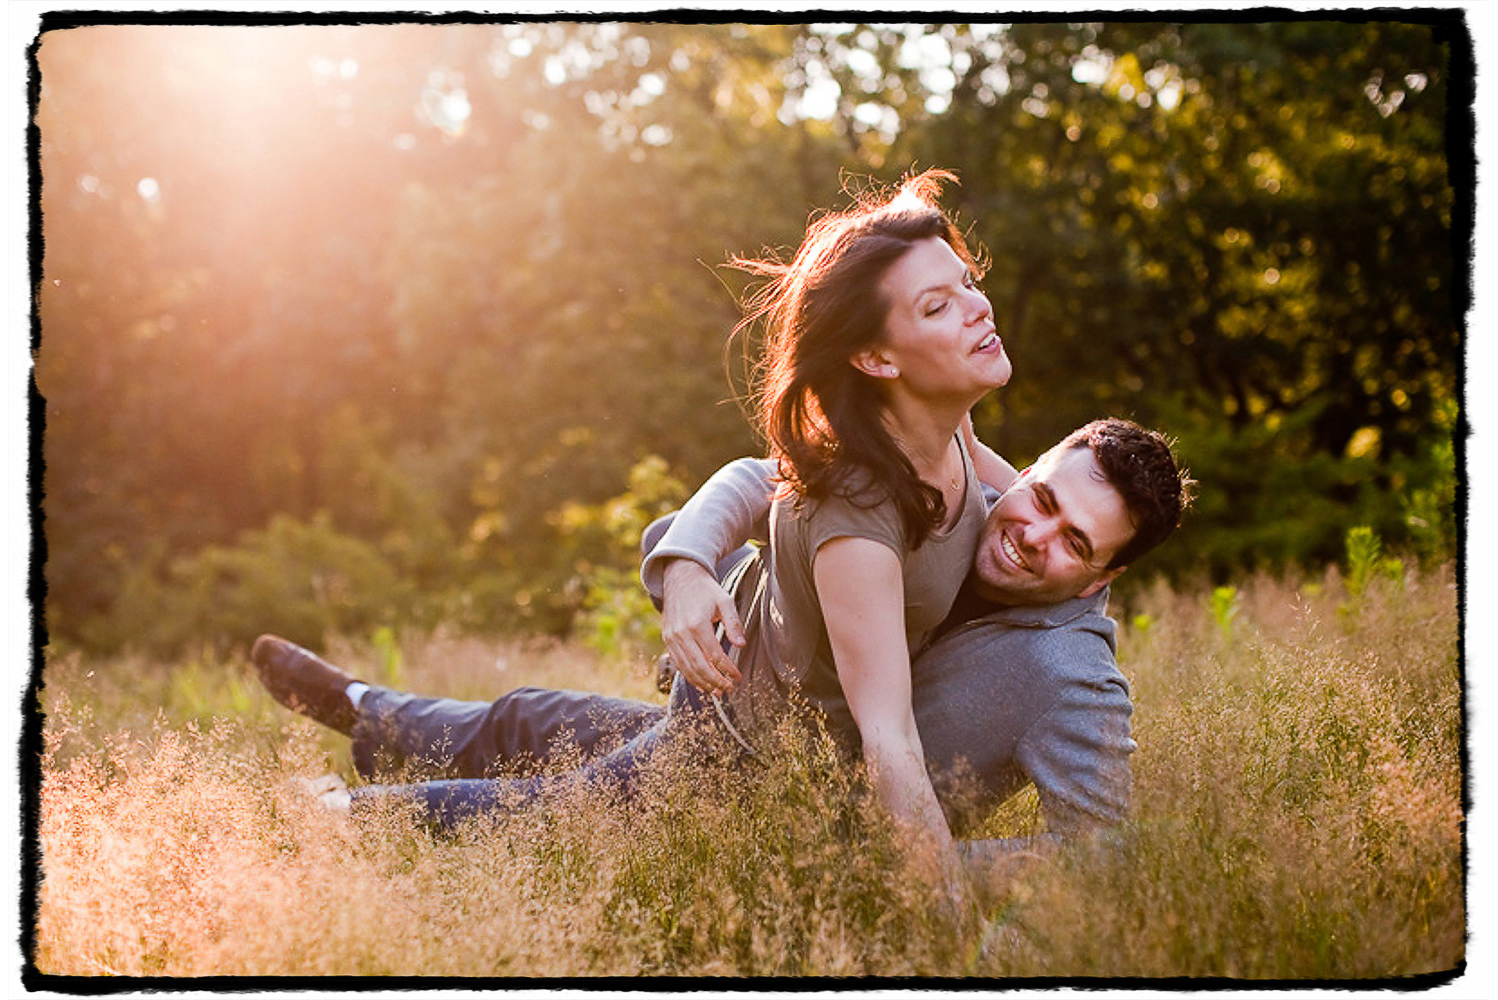 Engagement Portrait: Luke and Anna enjoyed some tussling in the grass in early spring in Central Park.